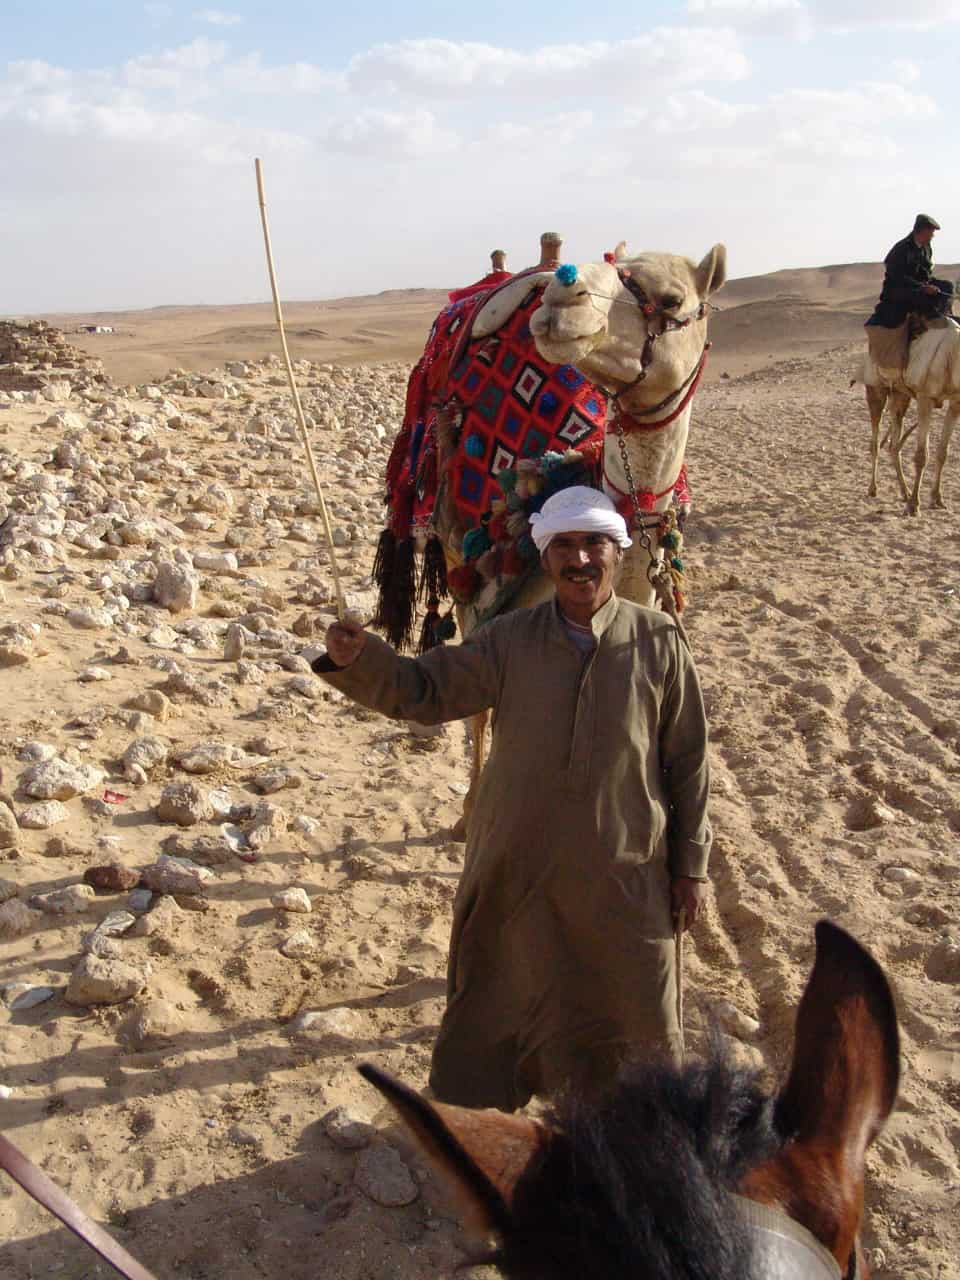 Camel driver at the Pyramids of Giza in Egypt